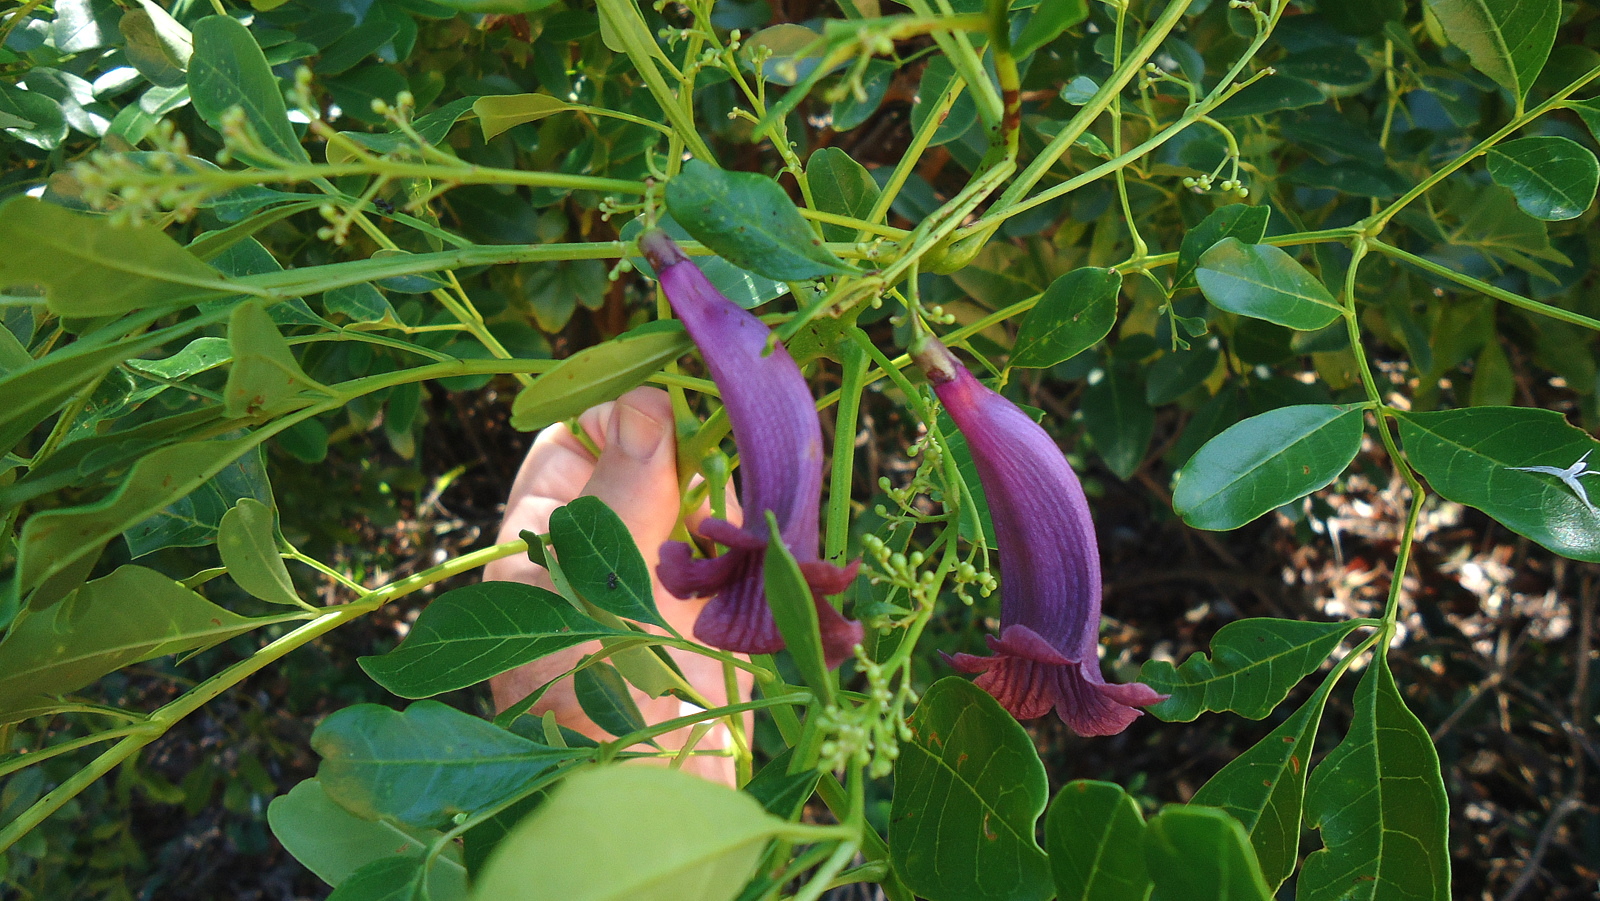 the purple flower of this plant has long, slender flowers